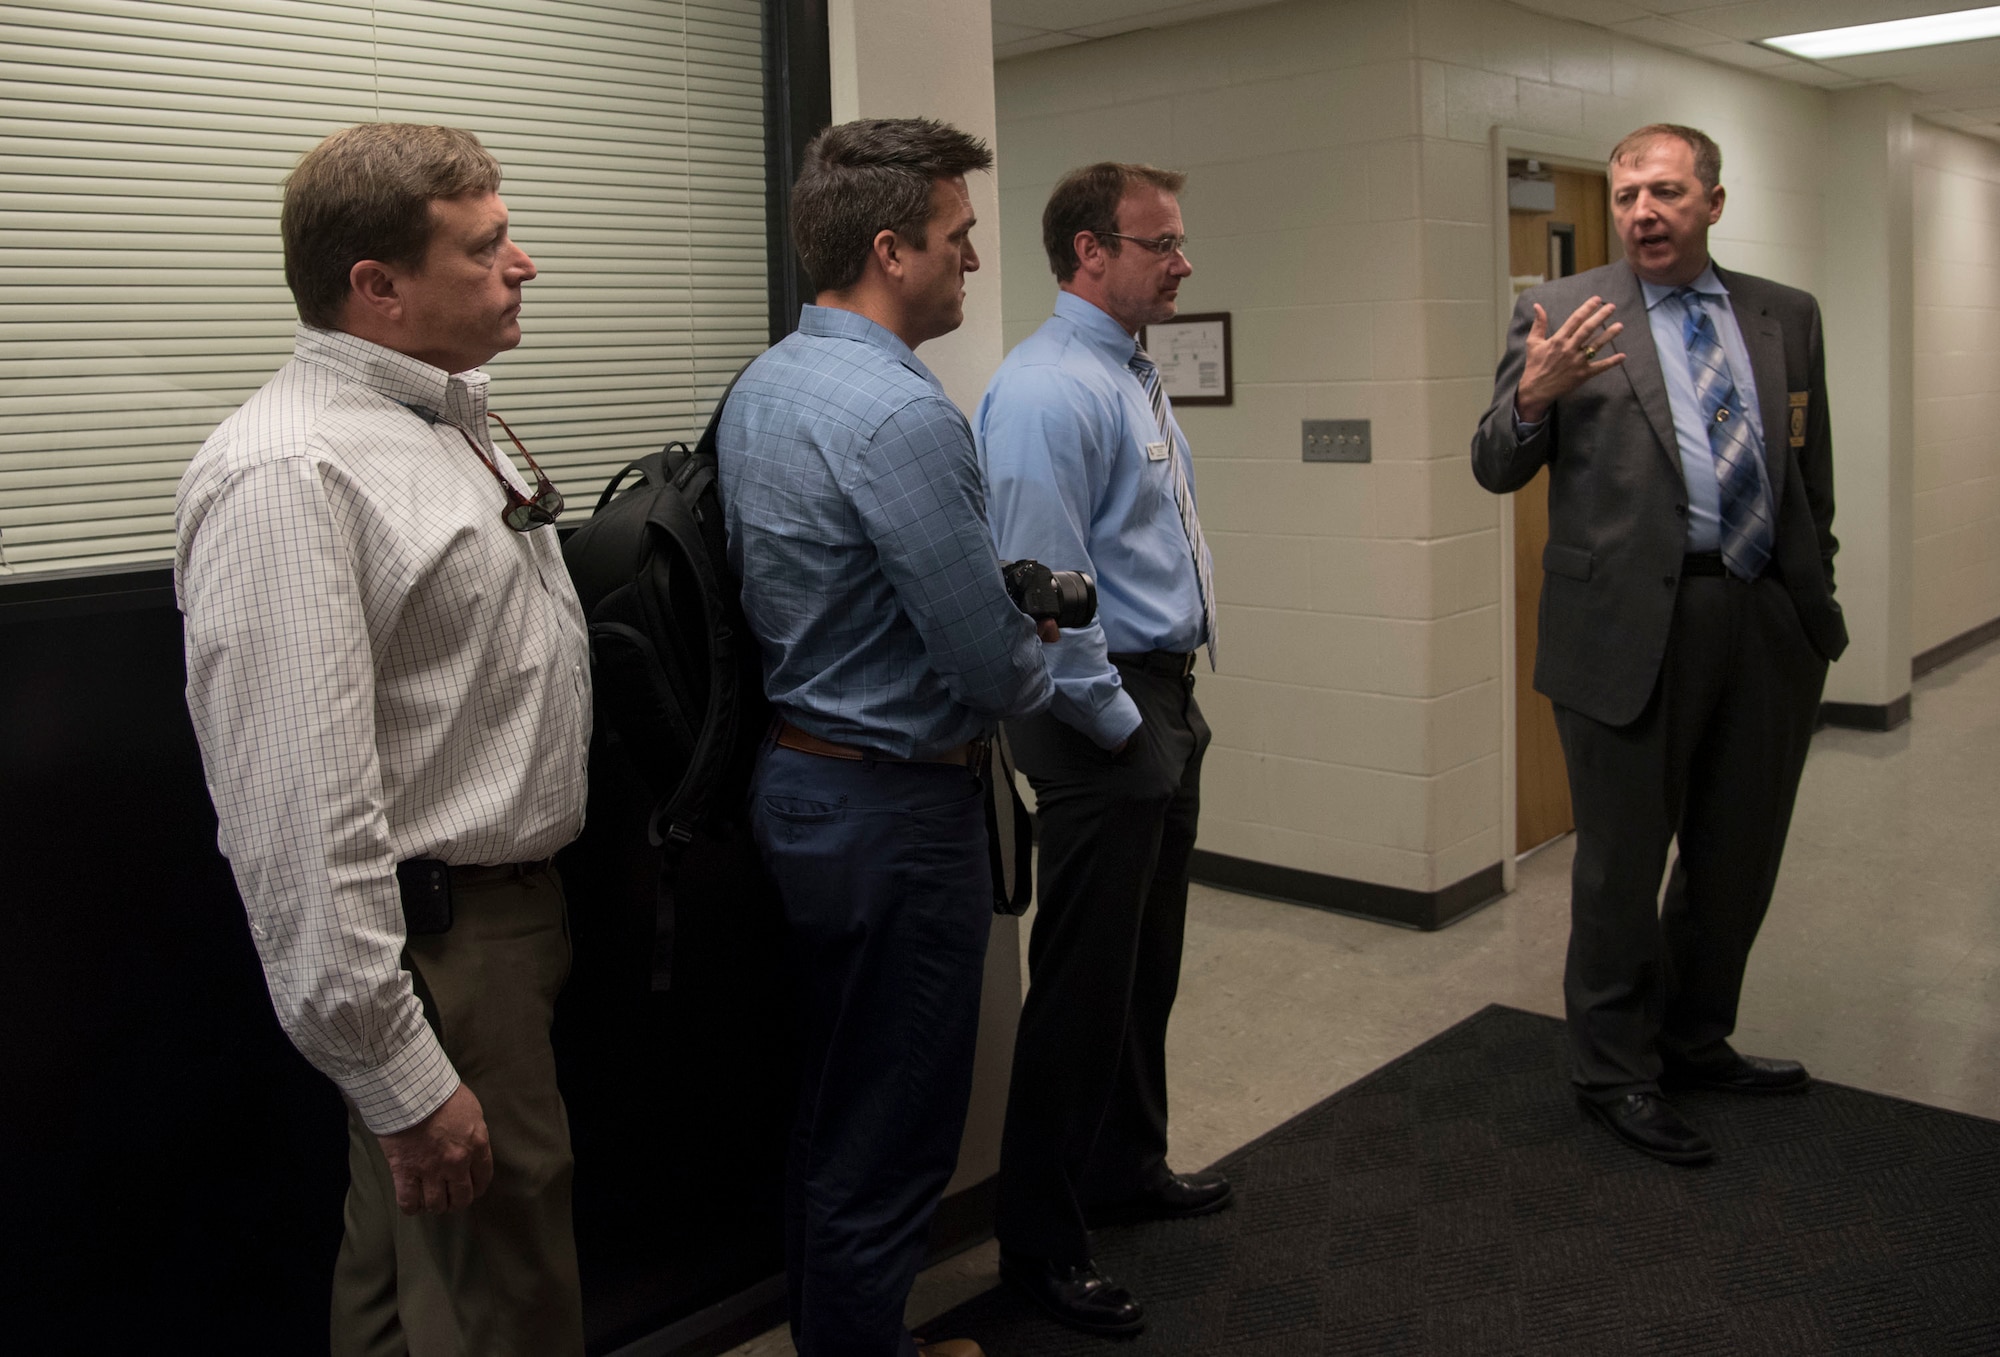 Valdosta Chief of Police Brian Childress, gives a tour of the Valdosta police department to members of Leadership Moody, May 12th, 2017, at the Valdosta, Ga., Police Department.  Leadership Moody is a development leadership program at Moody Air Force Base where selected Senior Non-Commissioned Officers, Field Grade Officers, and civilians gain leadership insights from local area leaders in government, education or other community agencies. (U.S. Air Force Photo by Capt. Korey Fratini)